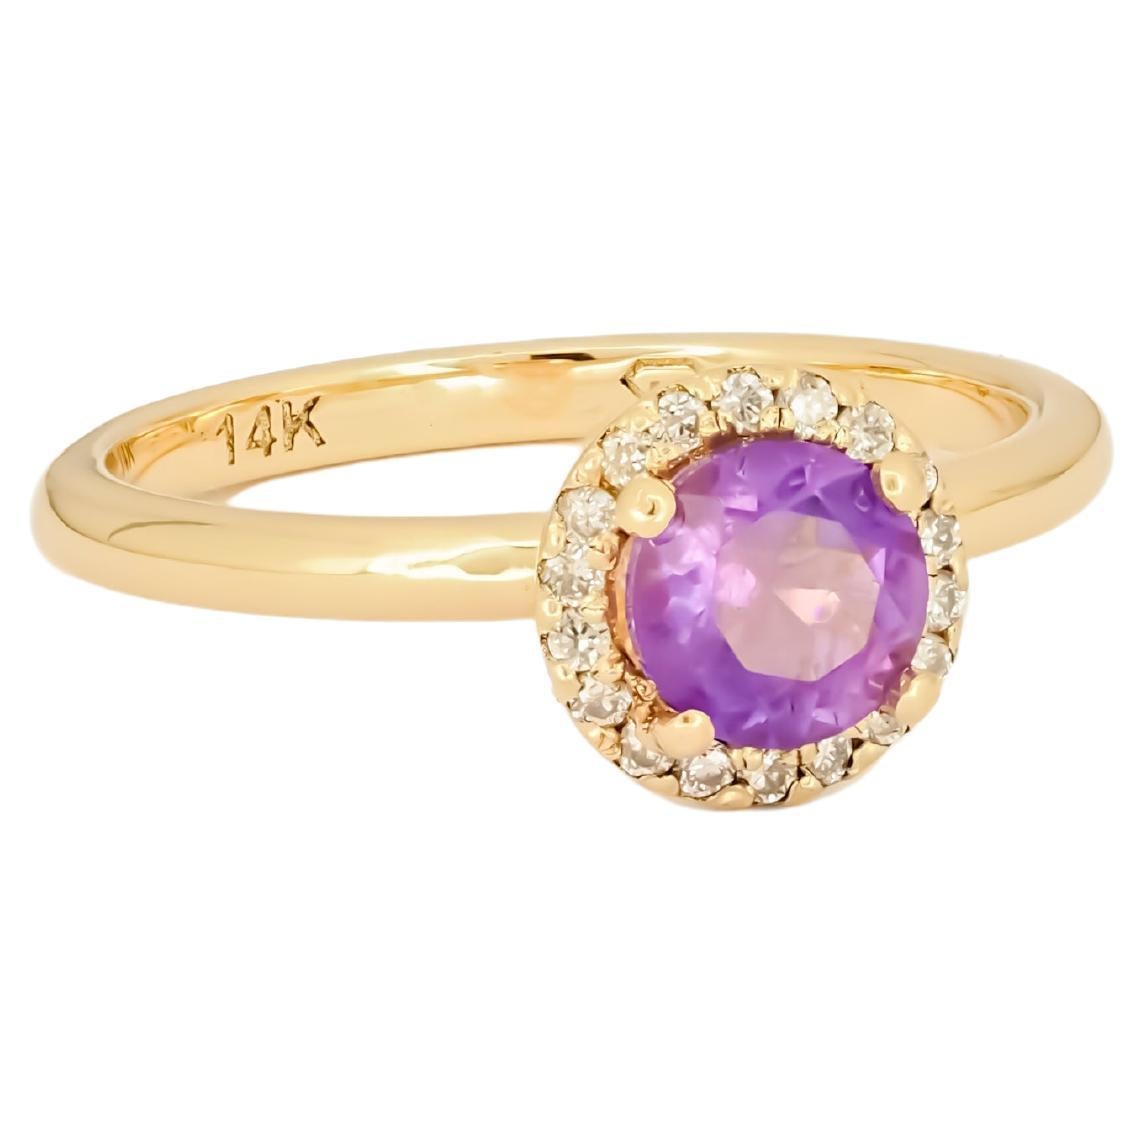 For Sale:  Halo Amethyst Ring with Diamonds in 14 Karat Gold, Amethyst Gold Ring